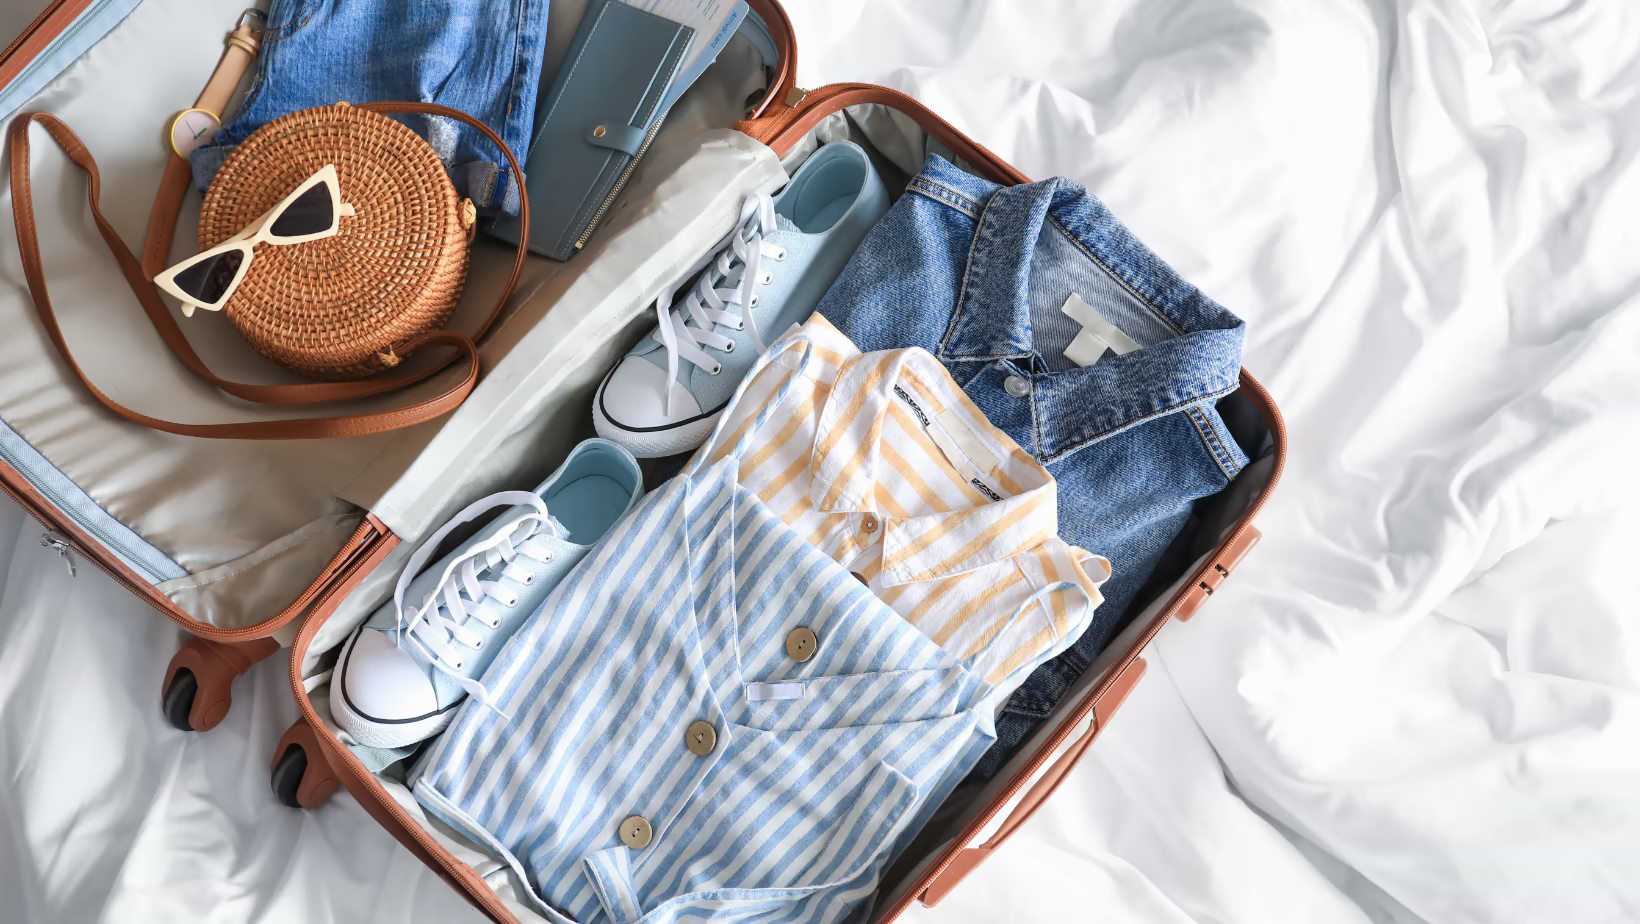 How to pack suitcase properly